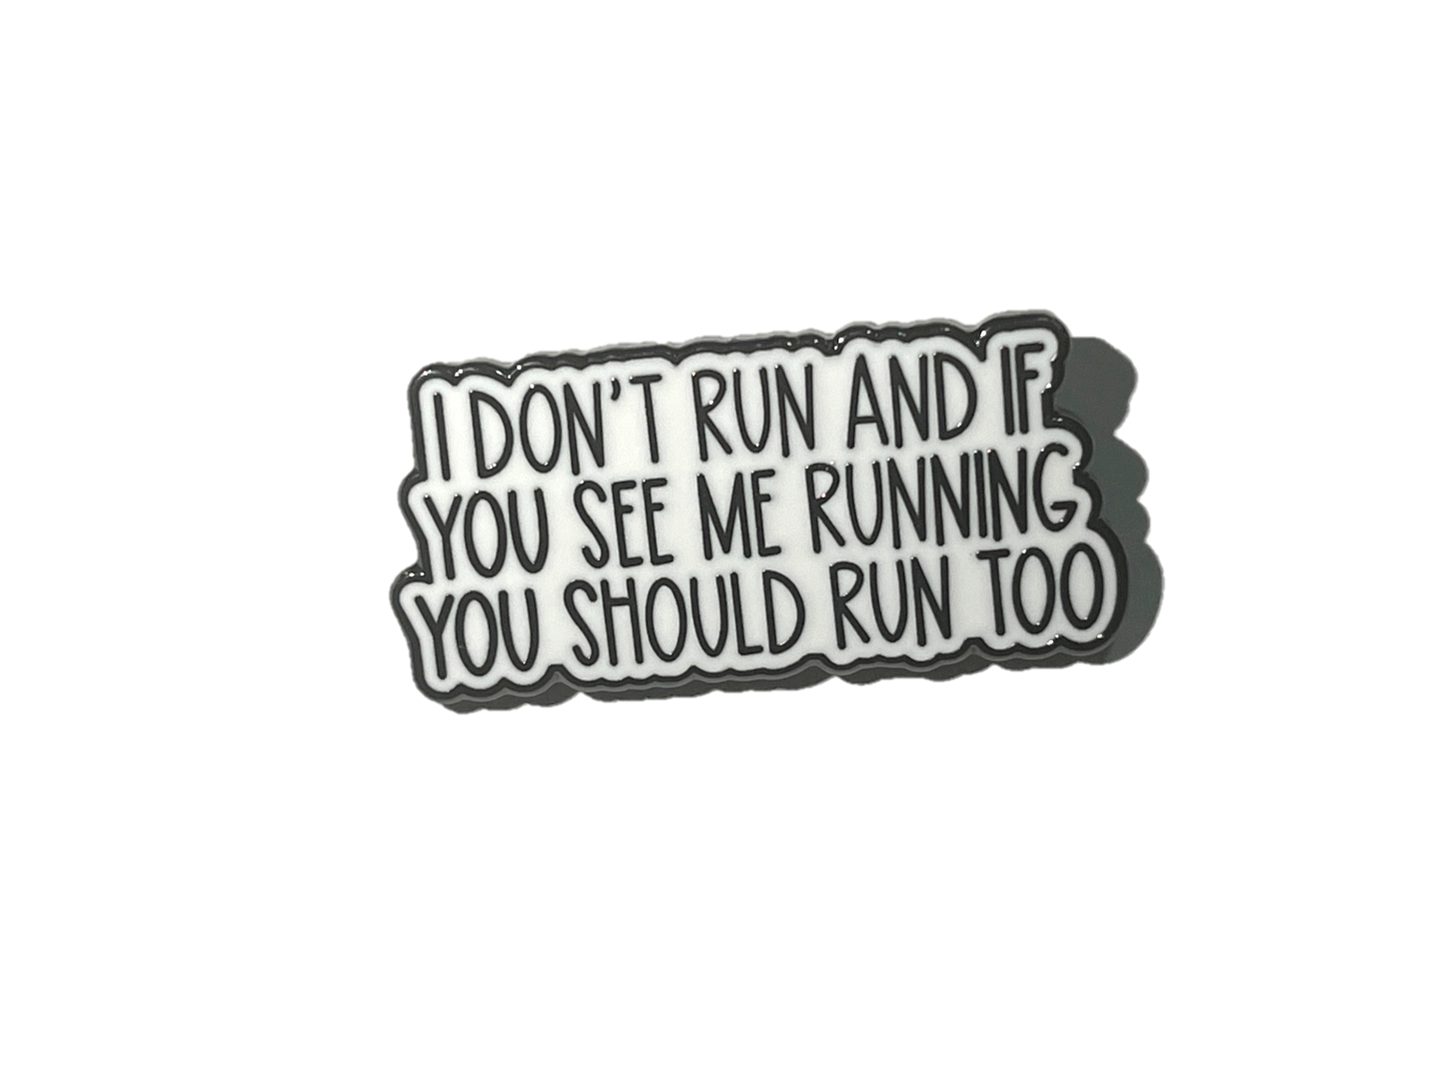 I don't run and if you see me running, you should run too